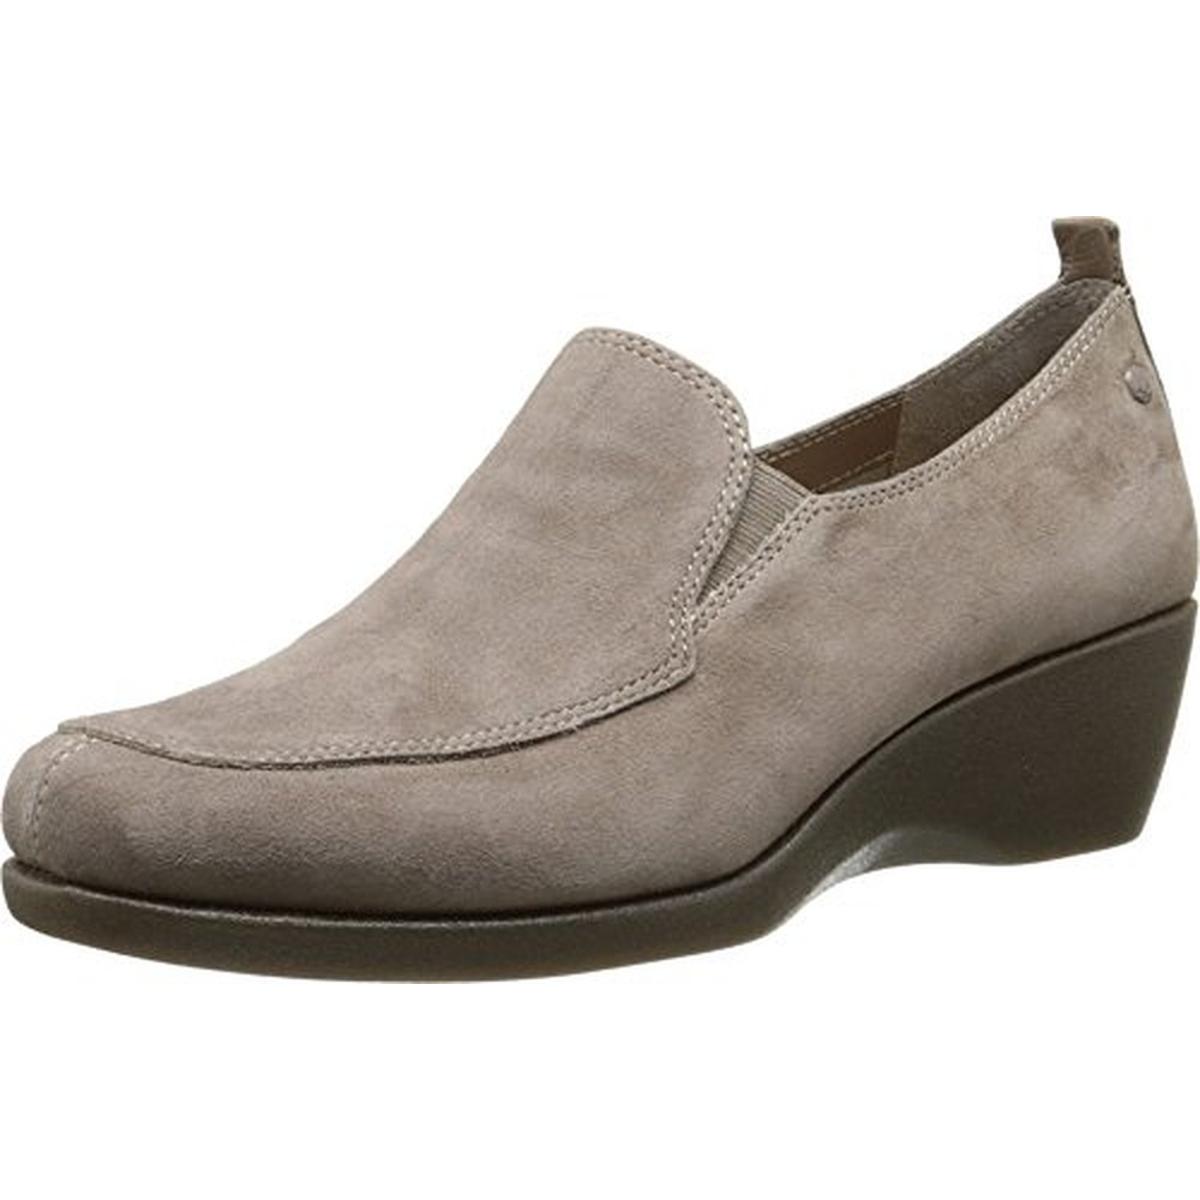 Hush Puppies 4469 Womens Vann Cleary Suede Loafer Slip On Wedge Heels ...